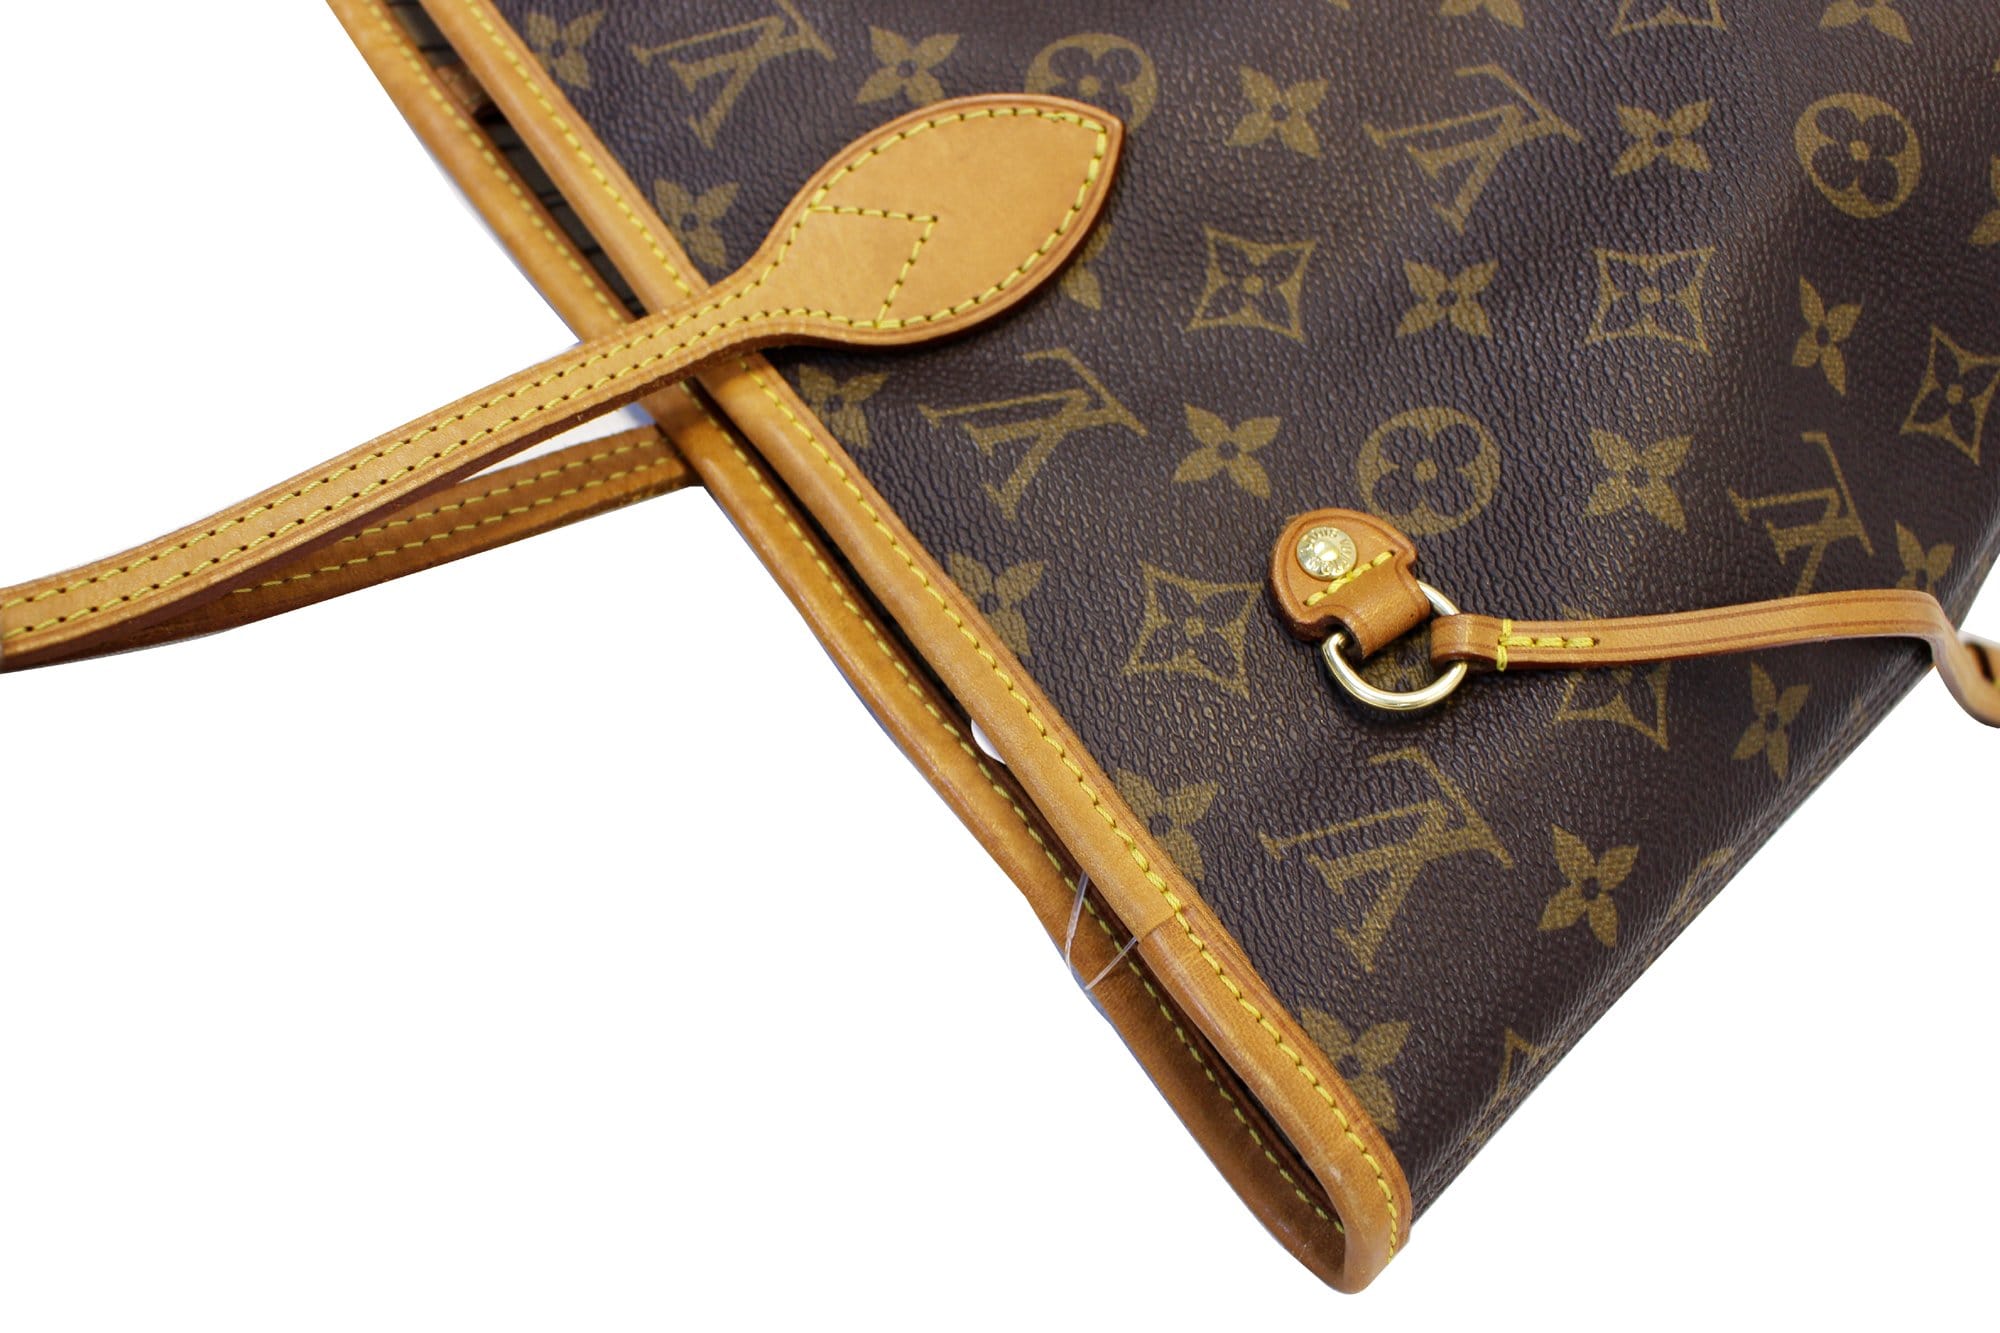 Bag - Monogram - Bag - 40156 – dct - Neverfull - Louis Vuitton Carryall  handbag in monogram canvas and natural leather - ep_vintage luxury Store -  Louis - Tote - Hand - Vuitton - MM